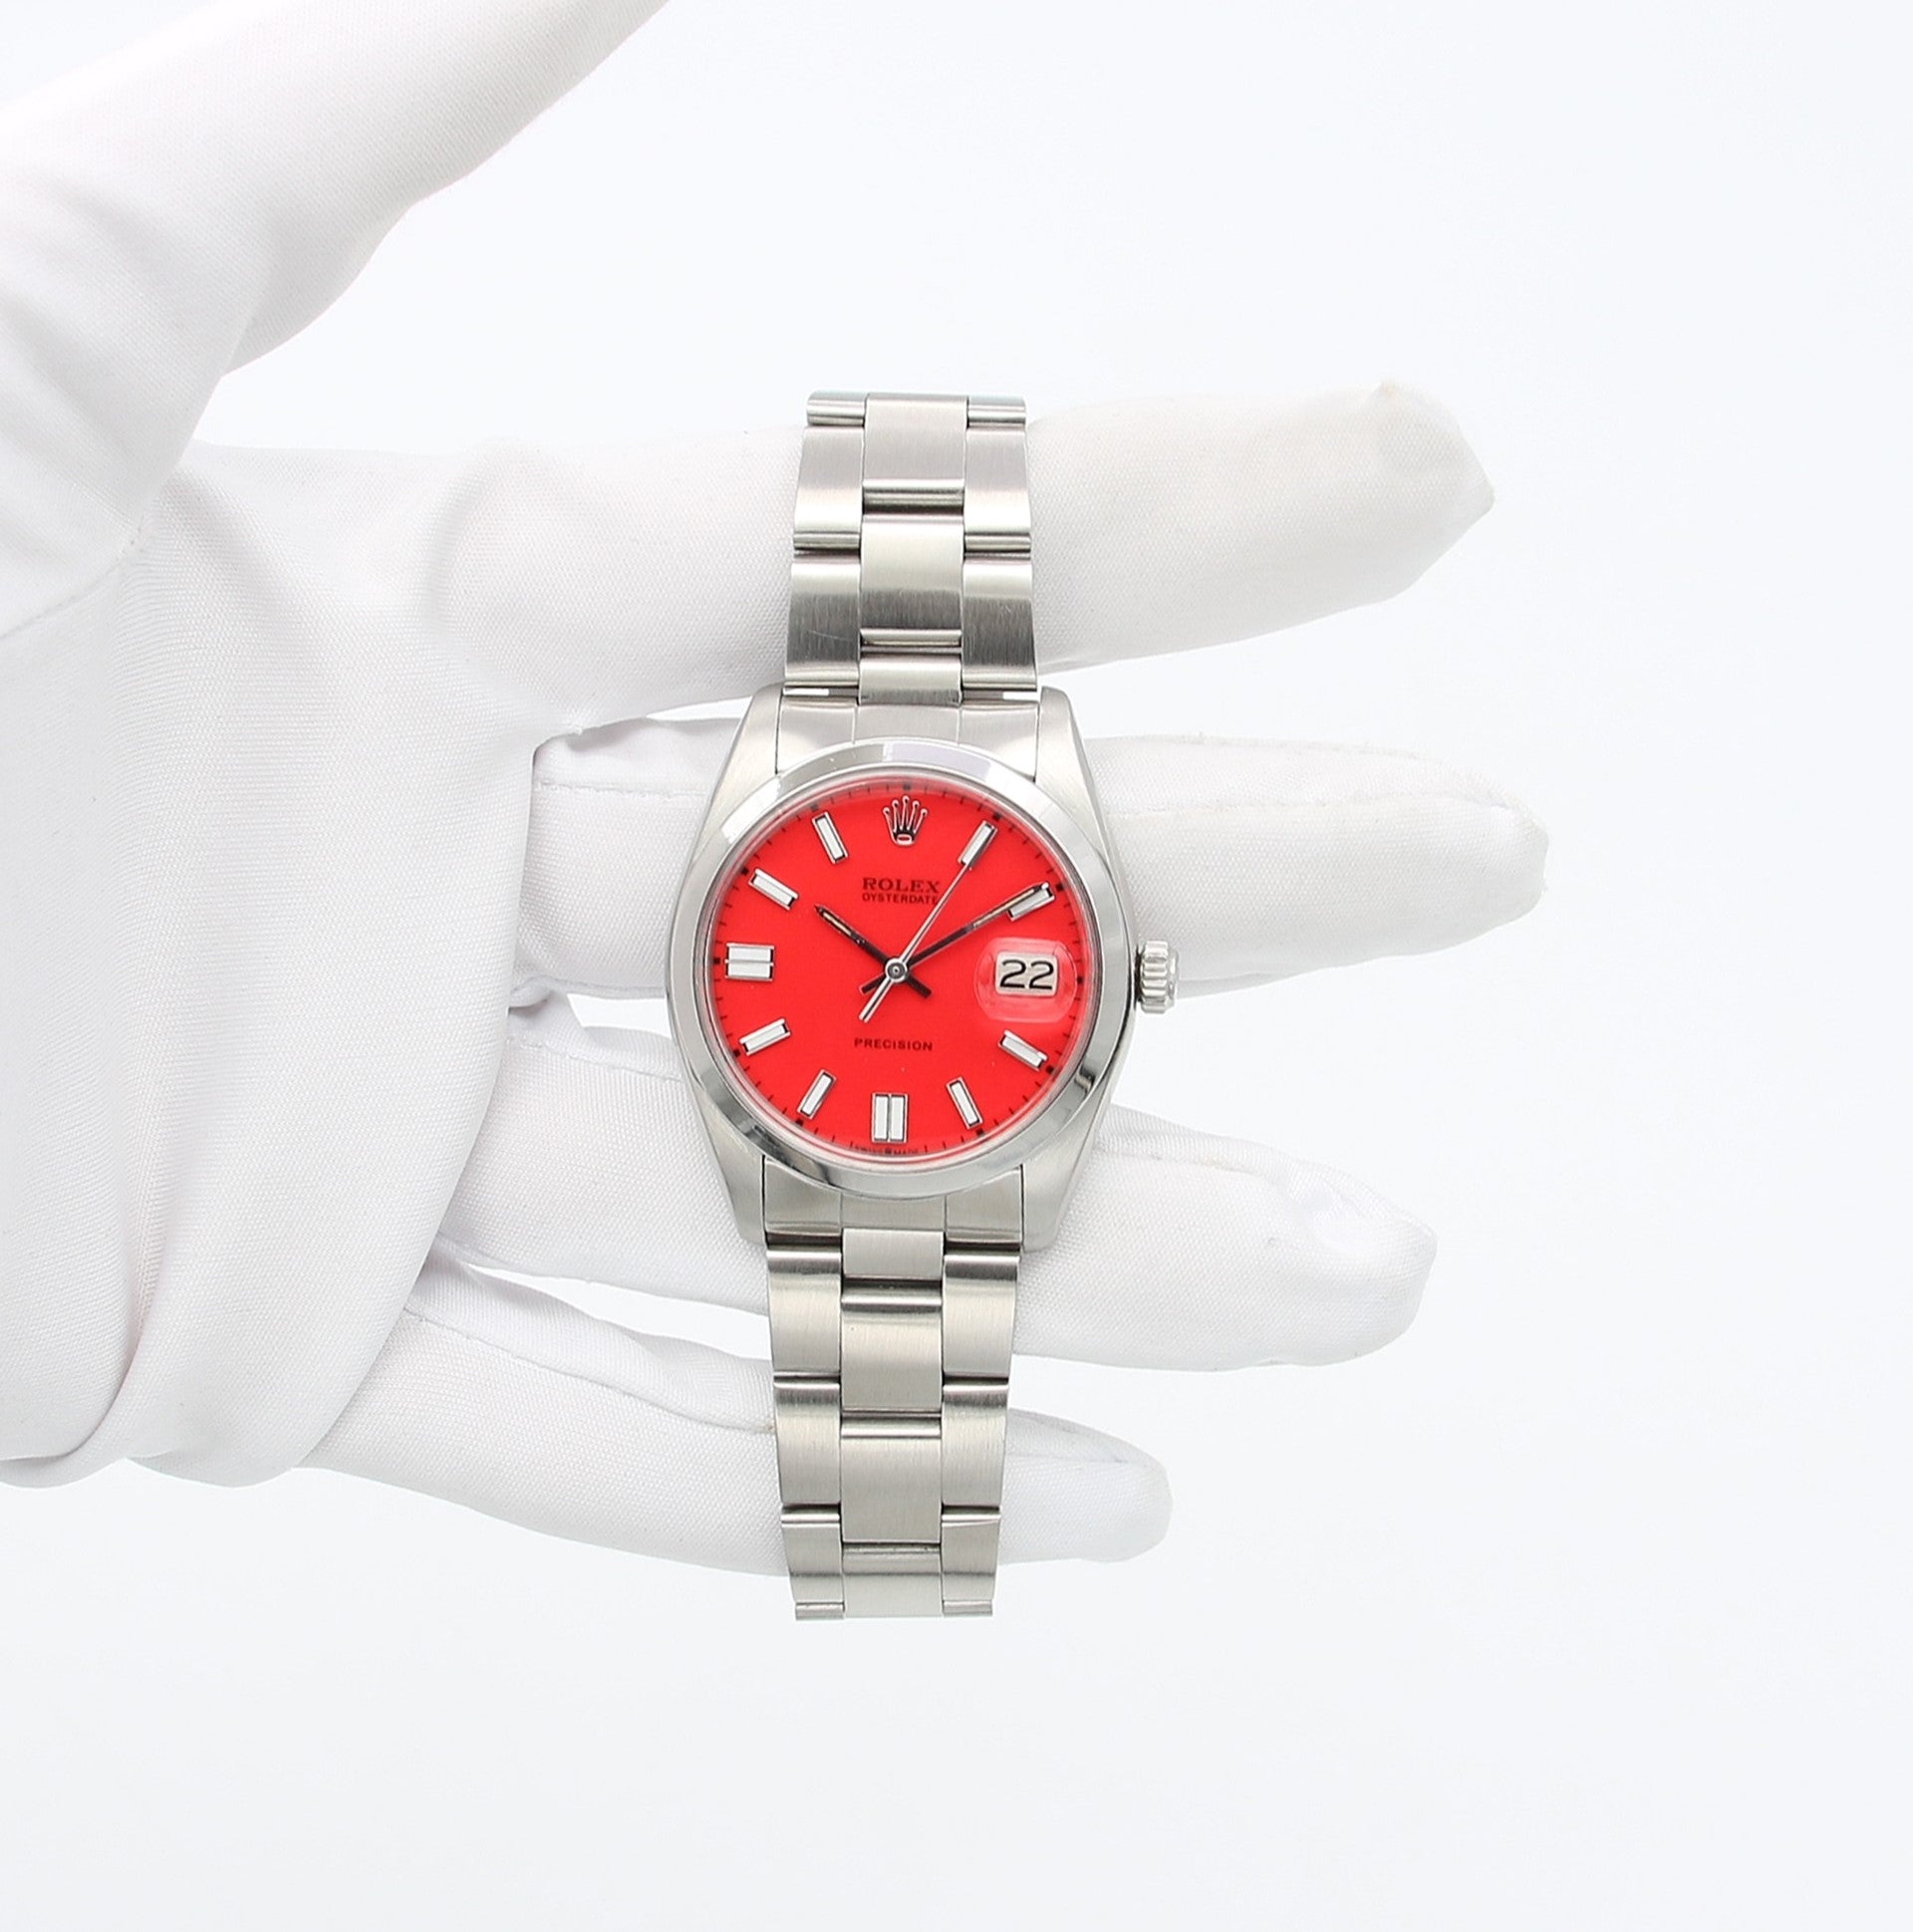 Rolex Oyster Precision Date Ref. 6694 - Red Dial Oyster Bracelet